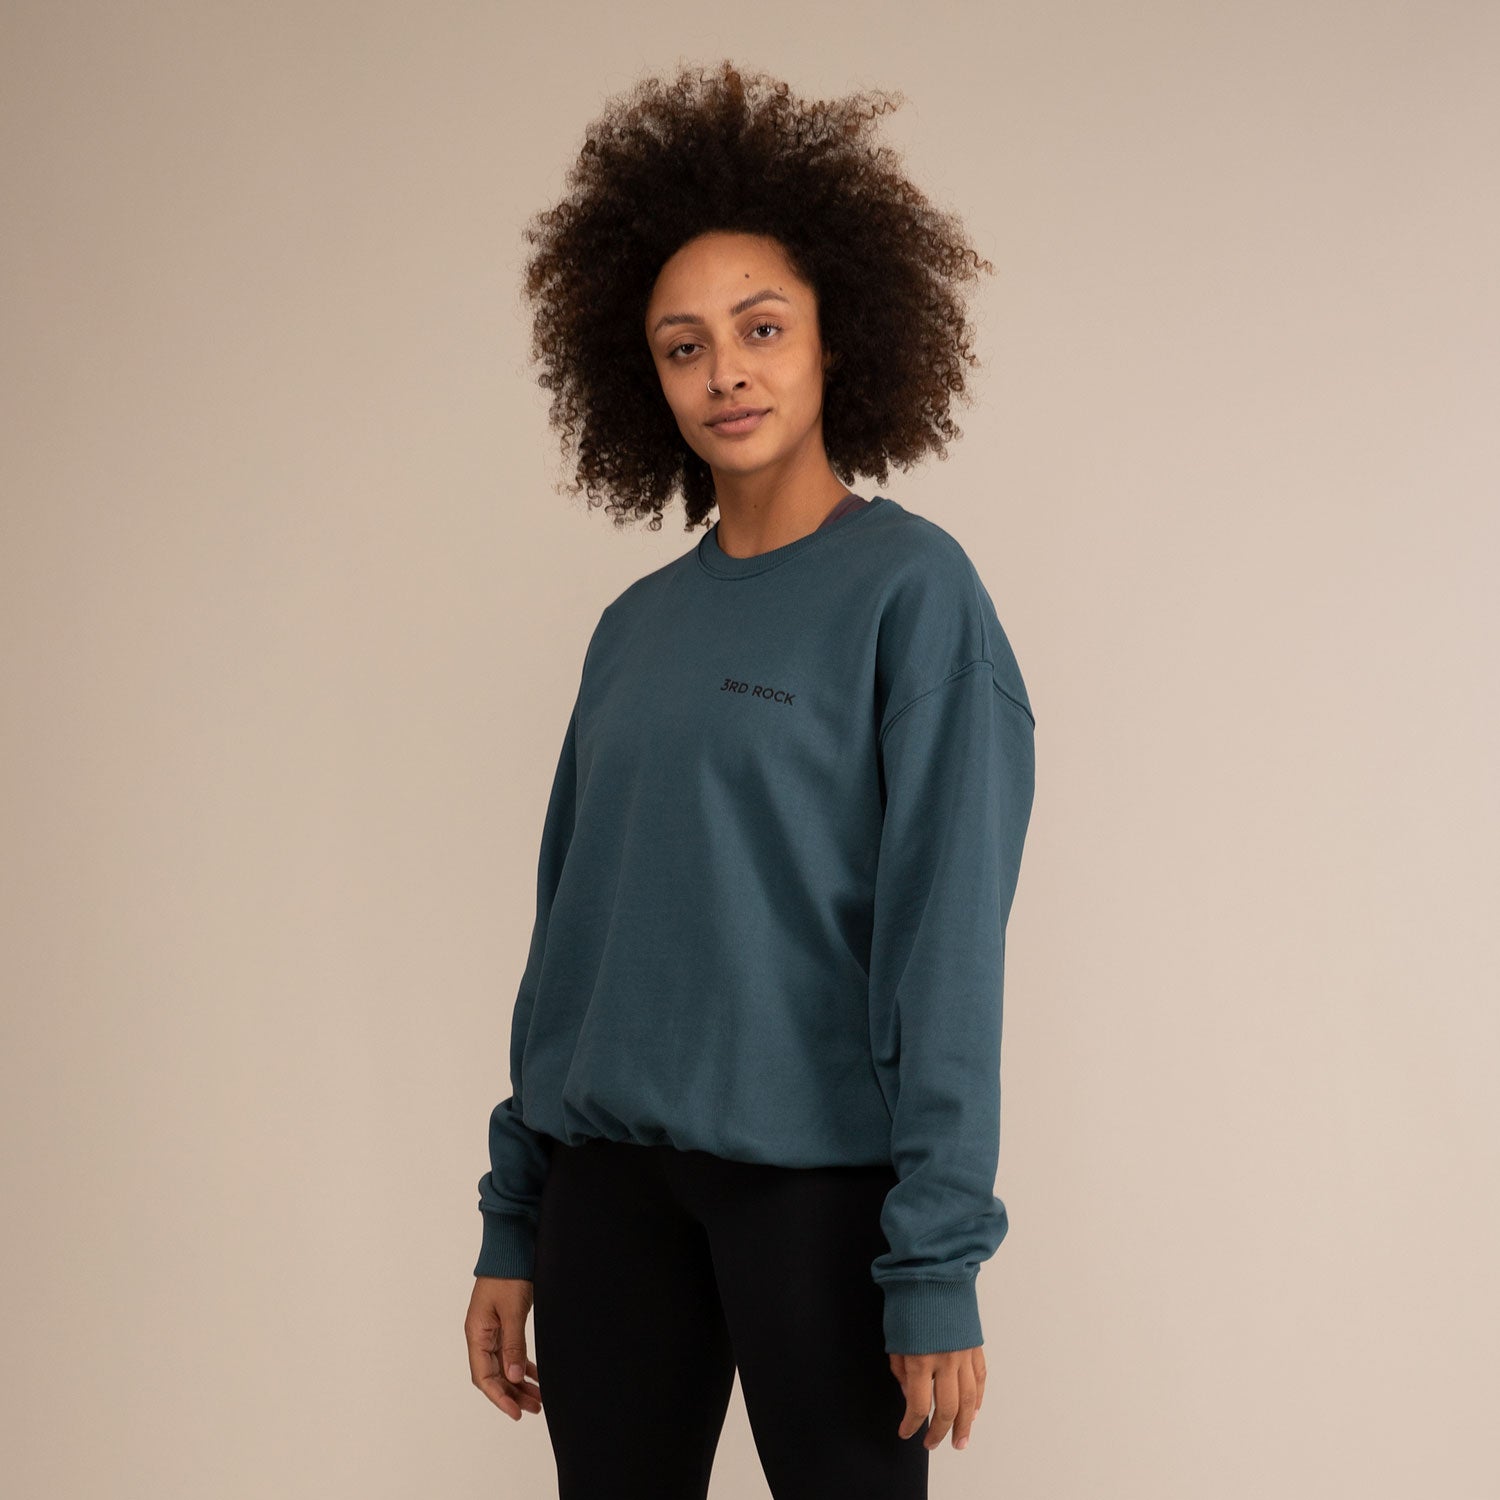 CHARLIE SWEATSHIRT | Oversized Organic Sweatshirt | 3RD ROCK Clothing -  Kendal is 5ft 8 with a 36" bust and wears a size M F